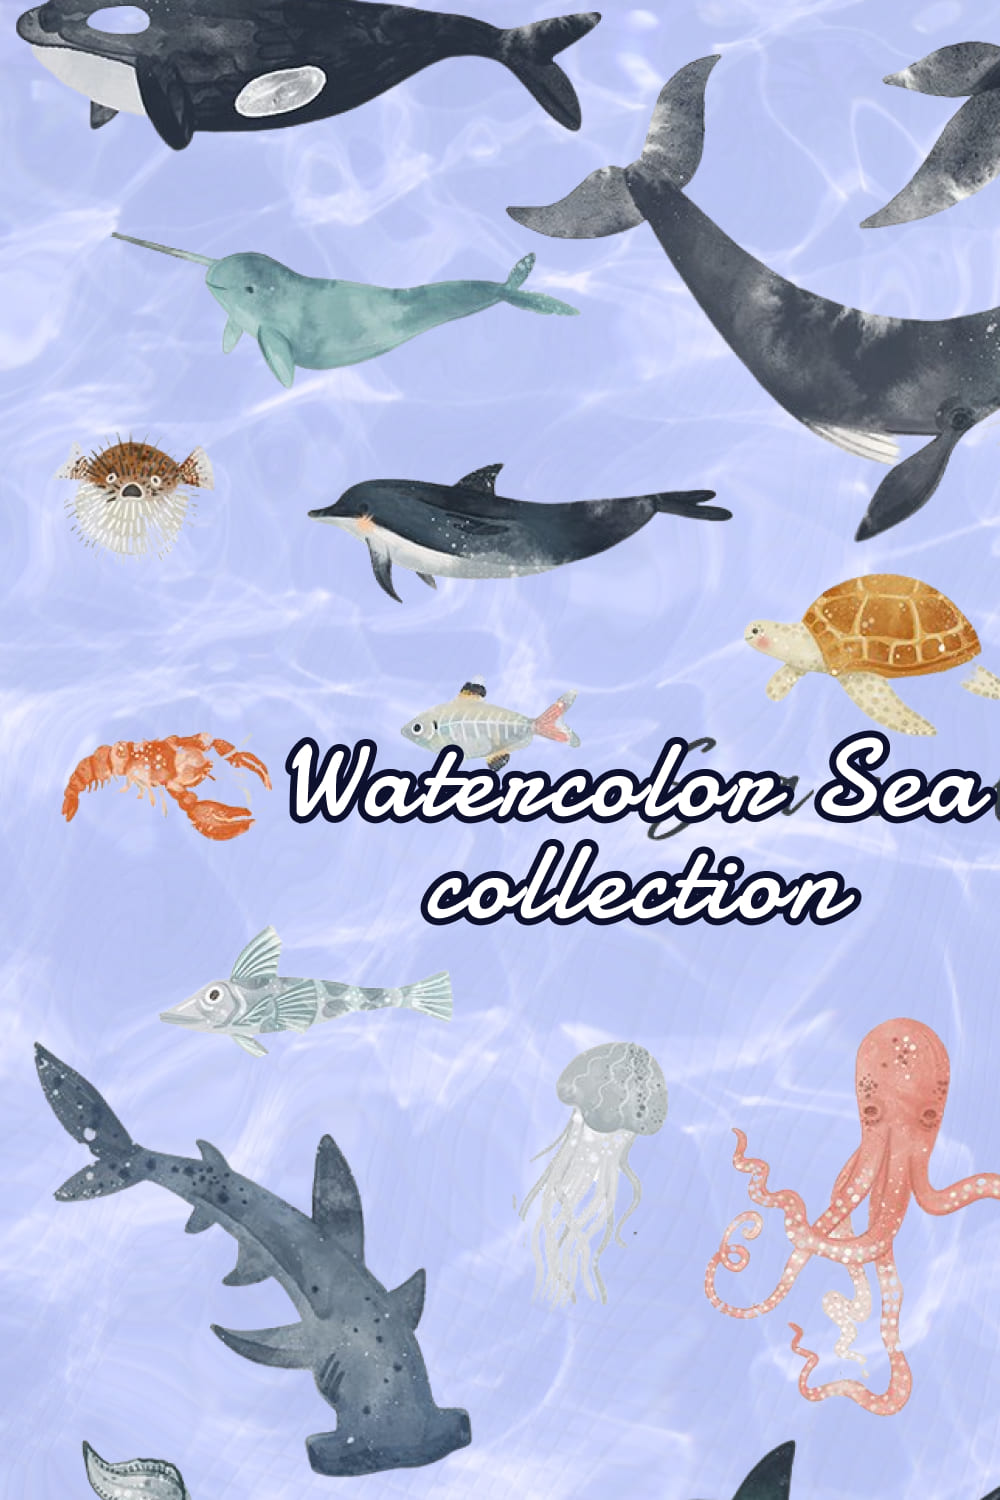 Watercolor Sea Collection - preview image.